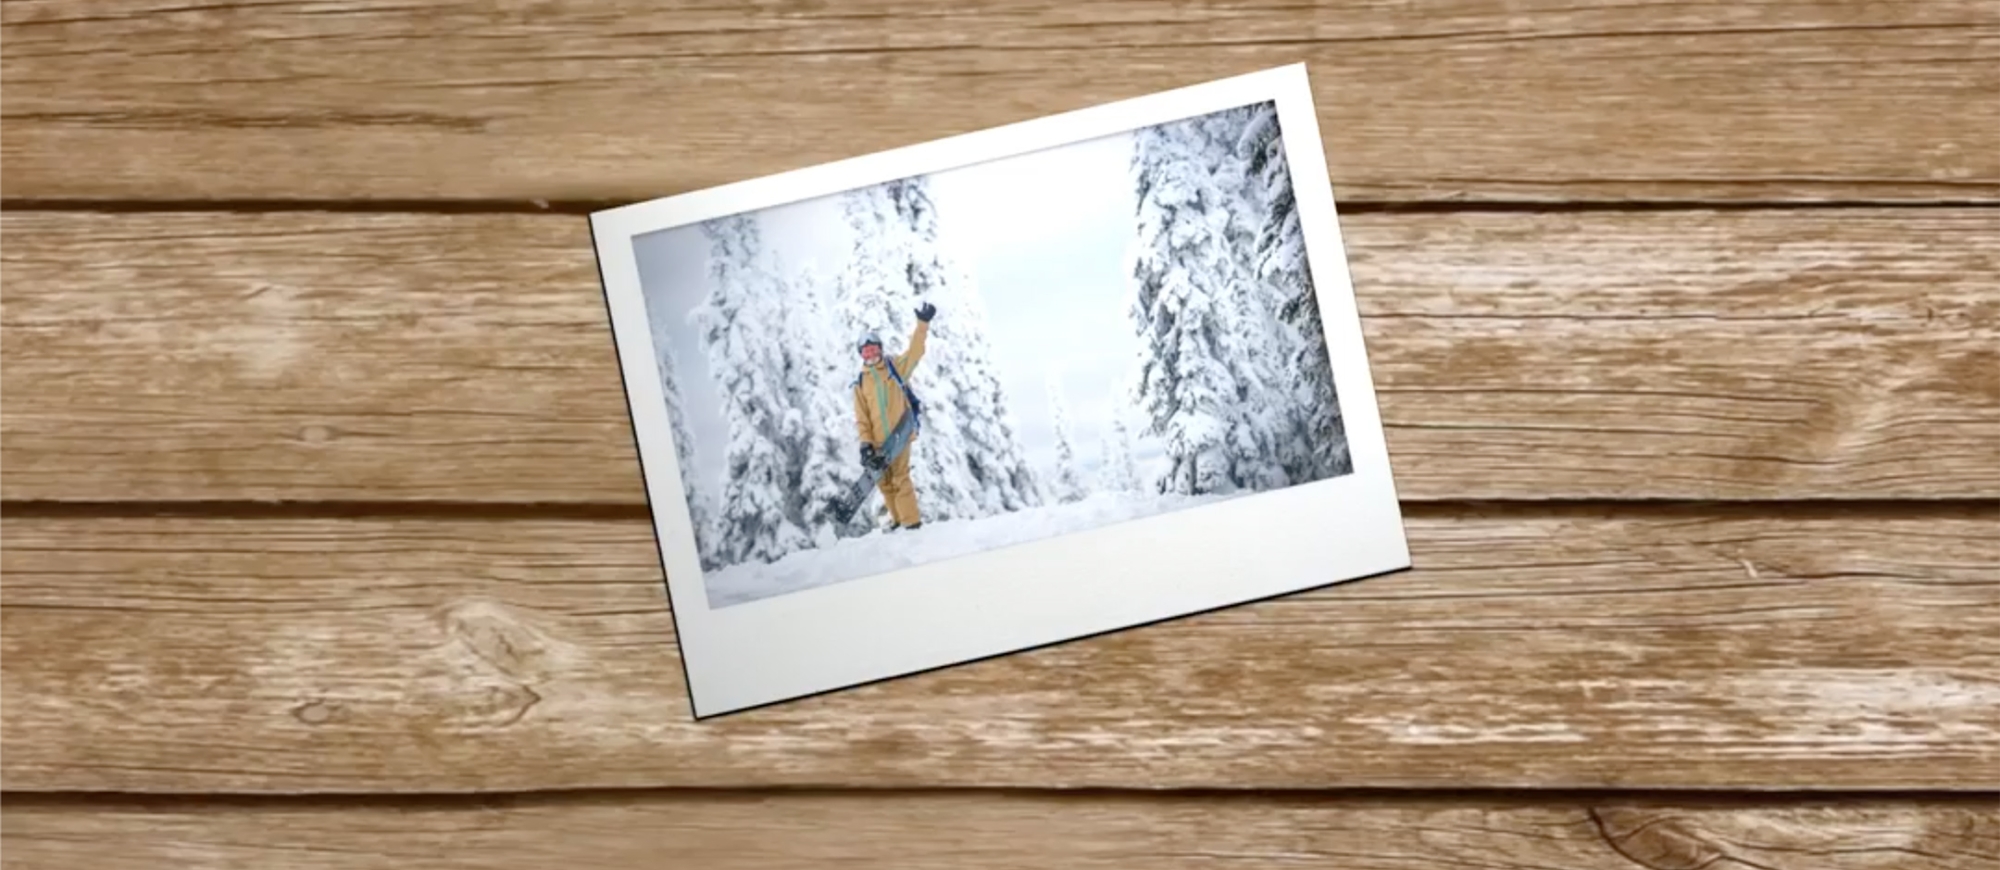 Photo lying on a wooden desk at an angle, of man on snowy day waving at camera